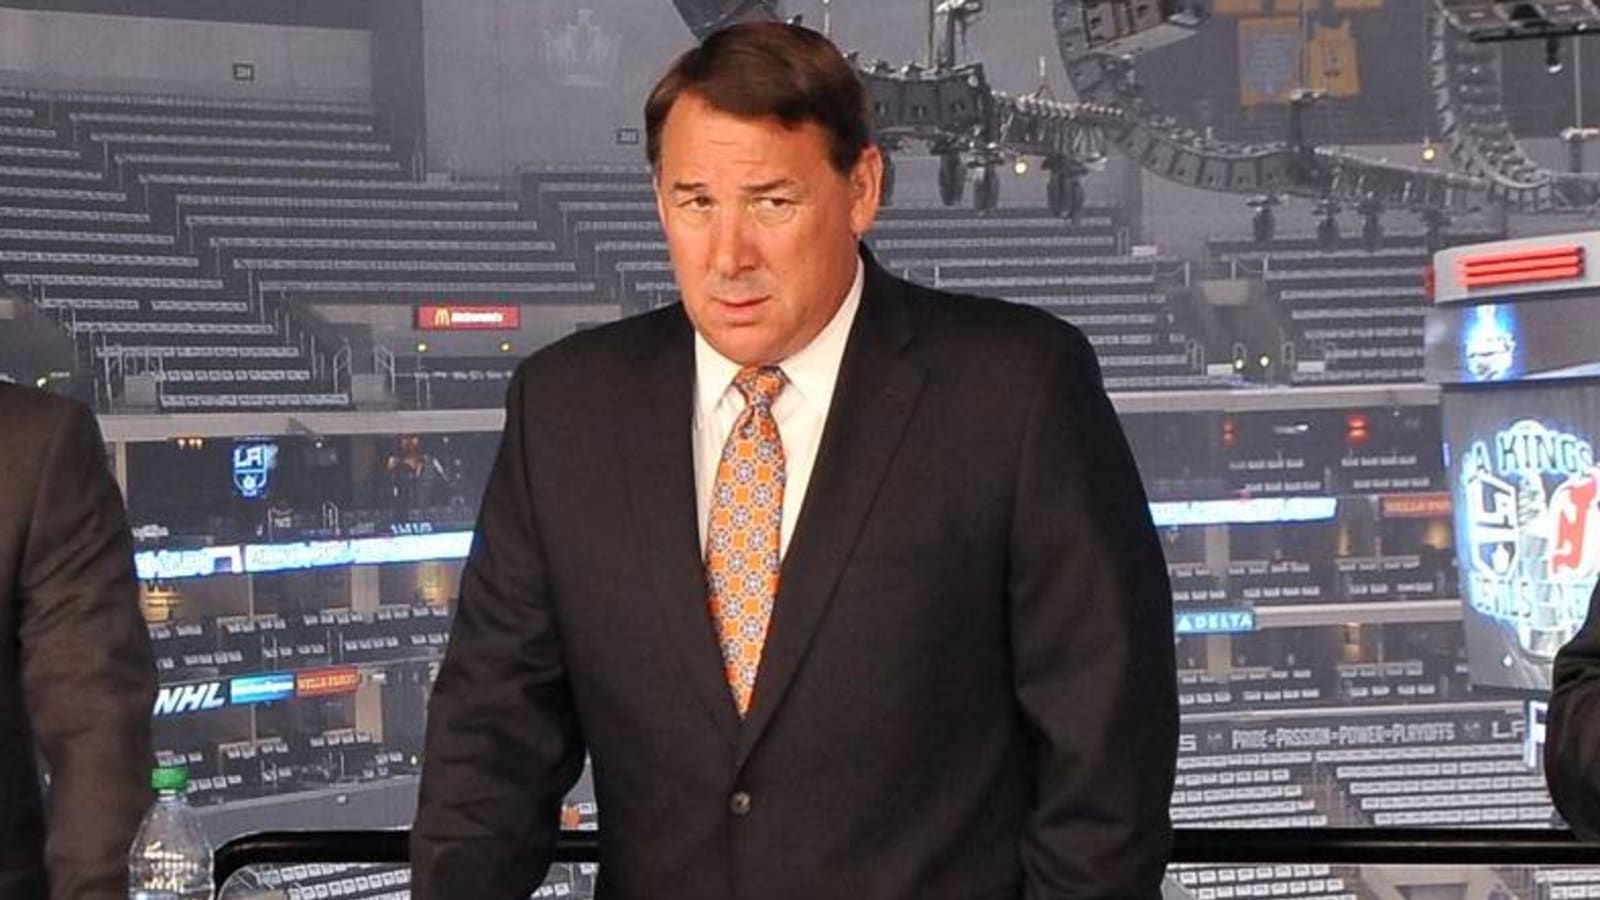 NBC's Milbury apologizes for insensitive comments during broadcast